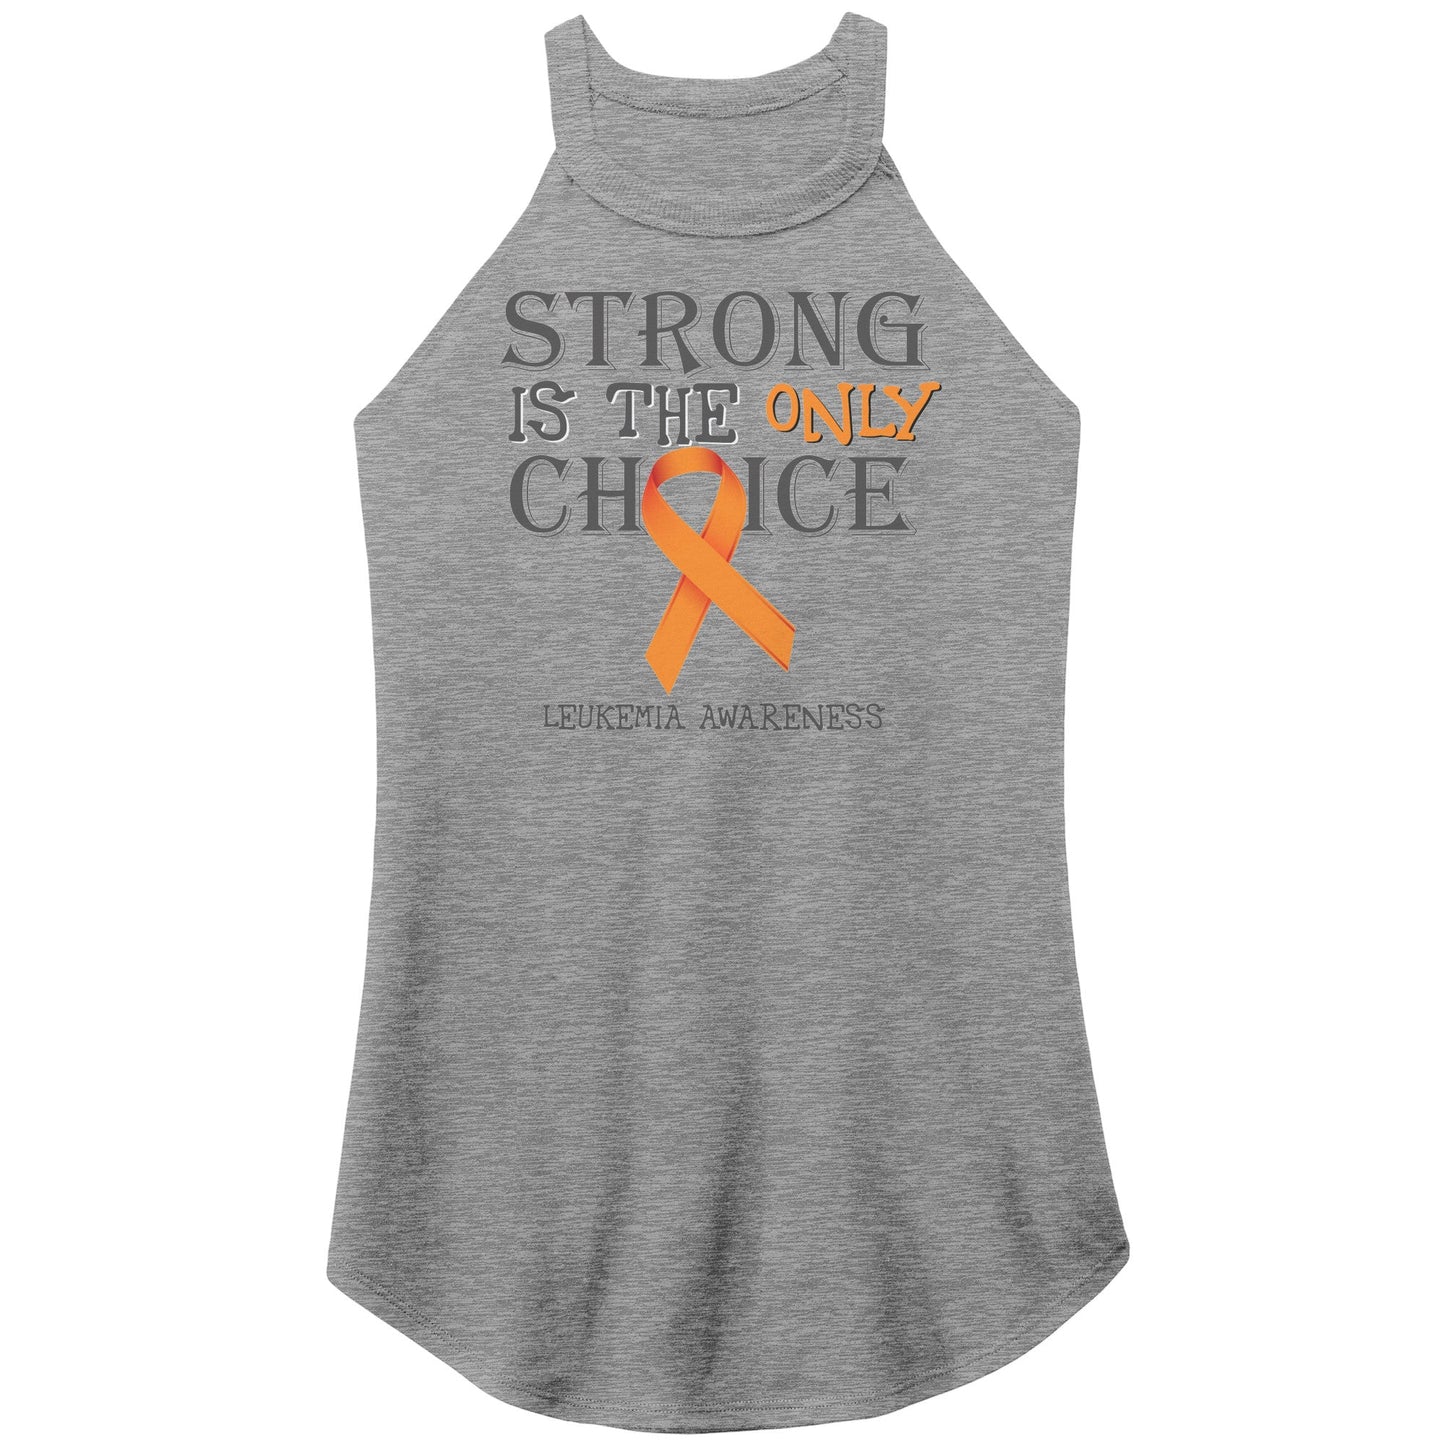 Strong is the Only Choice -Leukemia Awareness T-Shirt, Hoodie, Tank |x|